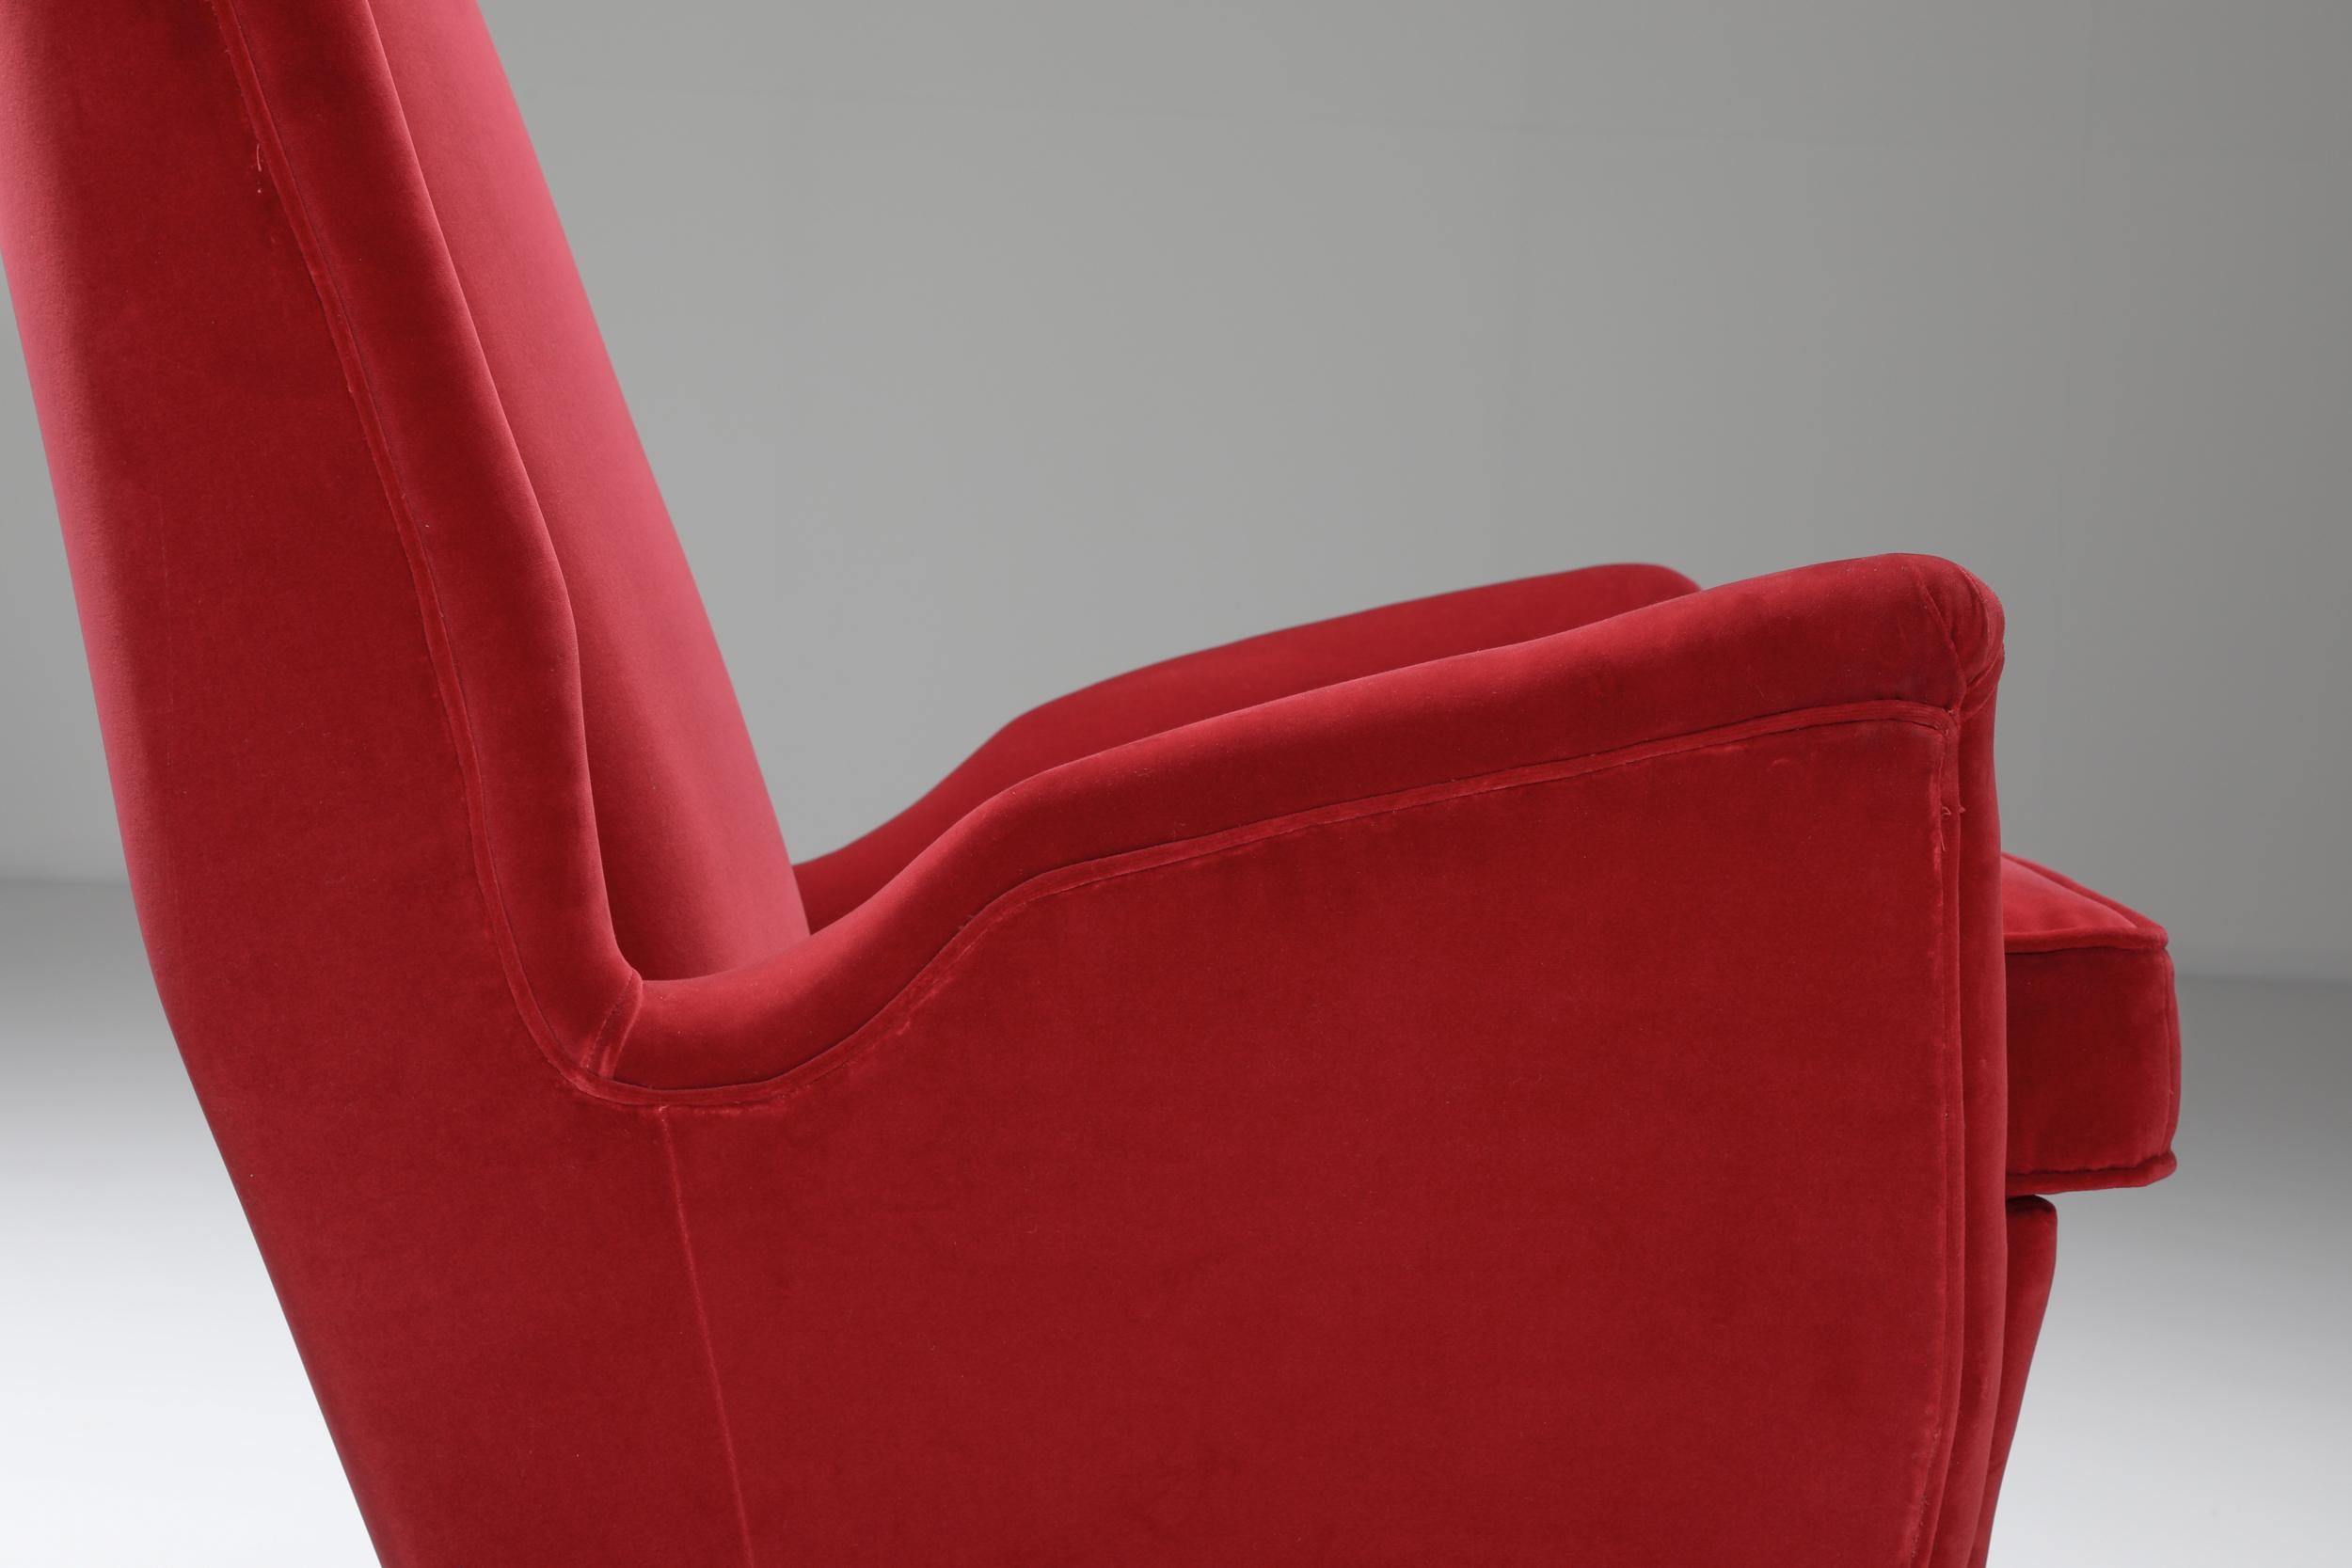 Italian Wingback Armchair in Red Velvet by Gio Ponti, 1950s For Sale 1